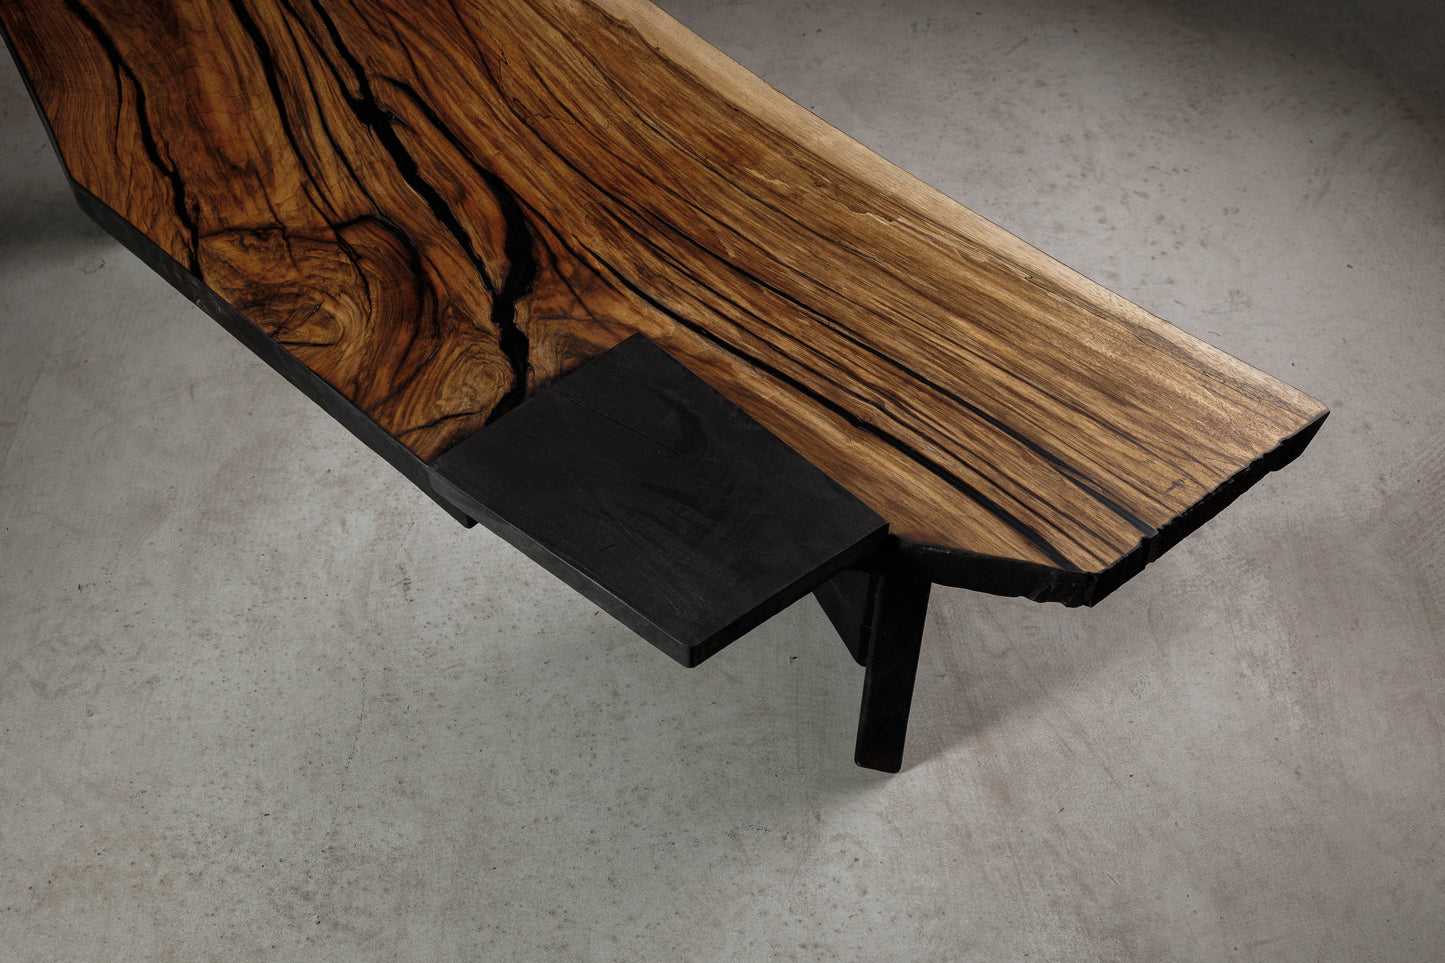 Japandi Inspired Walnut Slab Coffee Table EM108 Part Of 18Brut Collection | Image from above detailing the protruded charred walnut insert.  